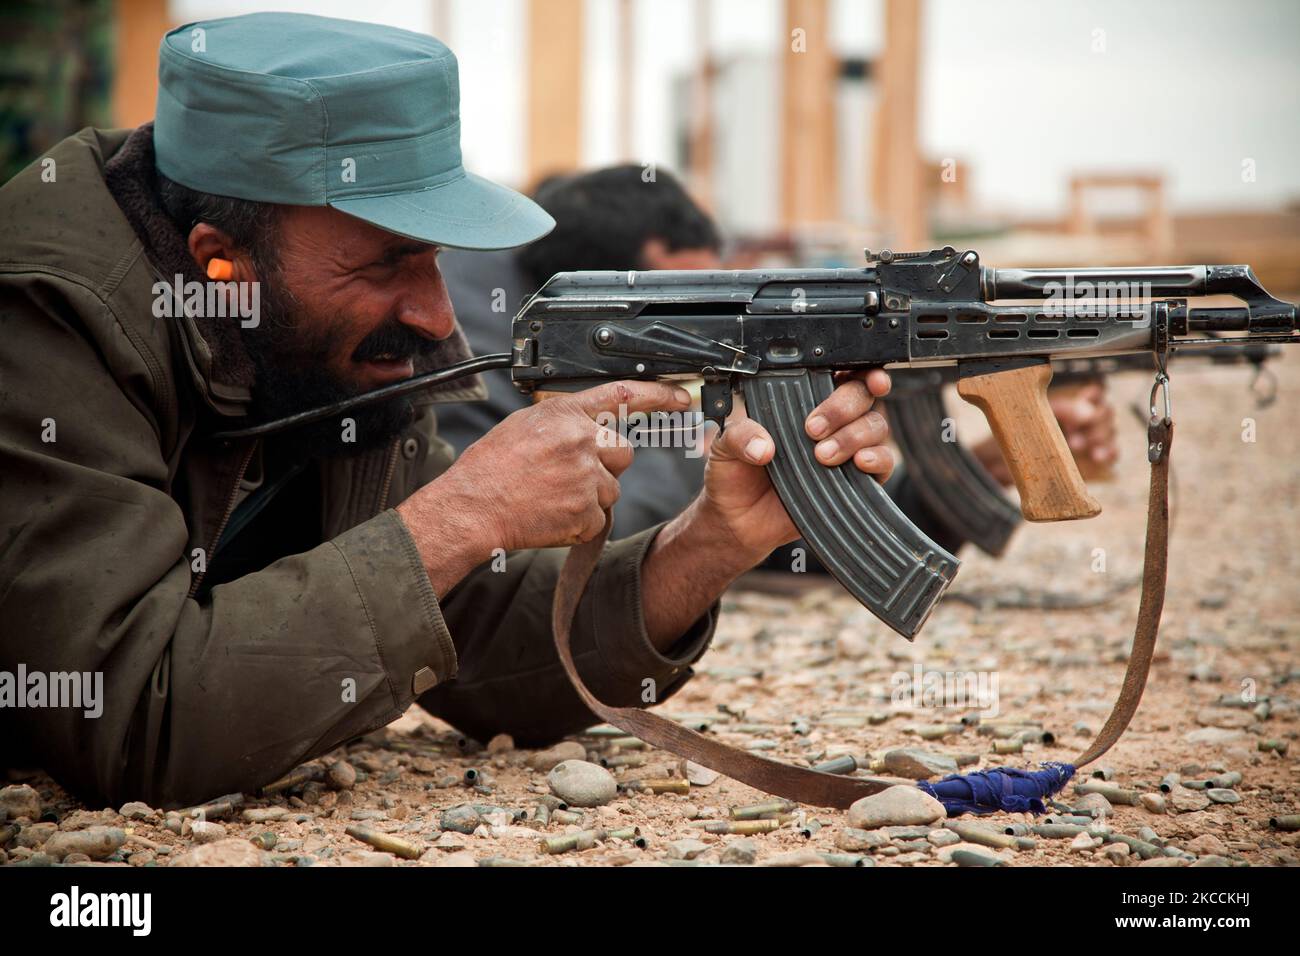 An Afghan National Police officer fires his AK-47 rifle. Stock Photo